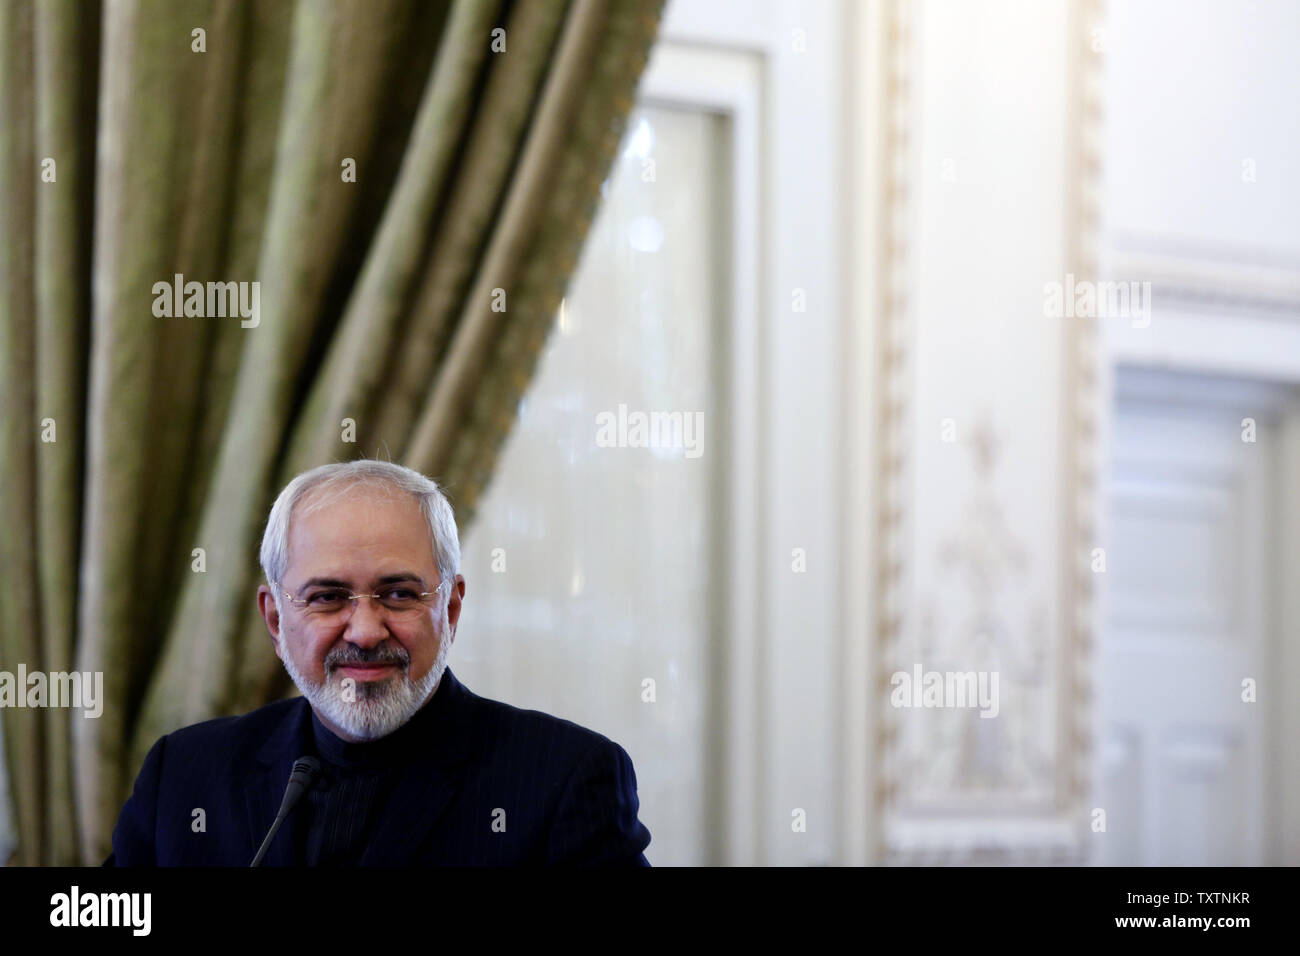 Iranian FM Mohammad Javad Zarif listens to a question during a joint press conference with Evangelos Venizelos, the Greek foreign minister (not pictured), at Iranian Foreign ministry in Tehran,Iran on March 15, 2014. Venizelos is scheduled to hold talks with other Iranian officials to discuss ways of expansion of bilateral ties between Athens and Tehran.     UPI/Maryam Rahmanian Stock Photo